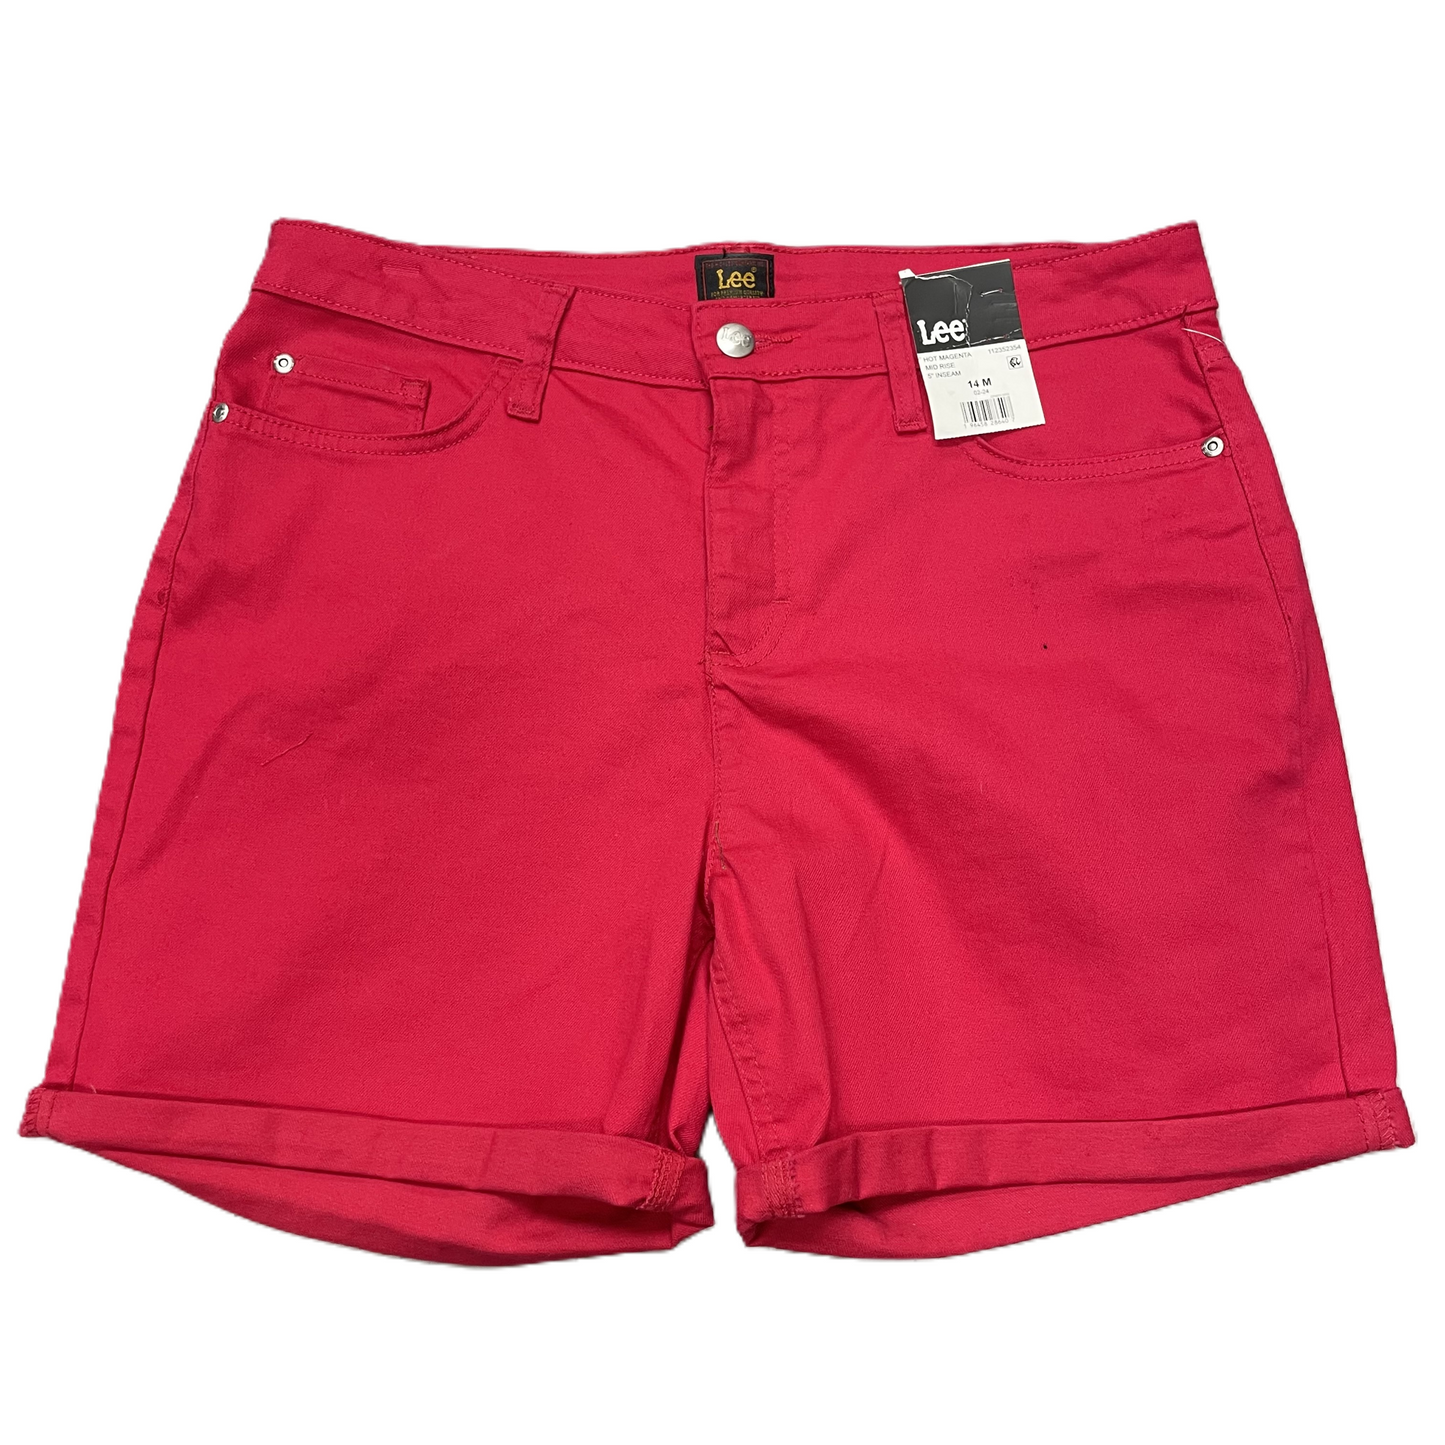 Red Shorts By Lee, Size: 14